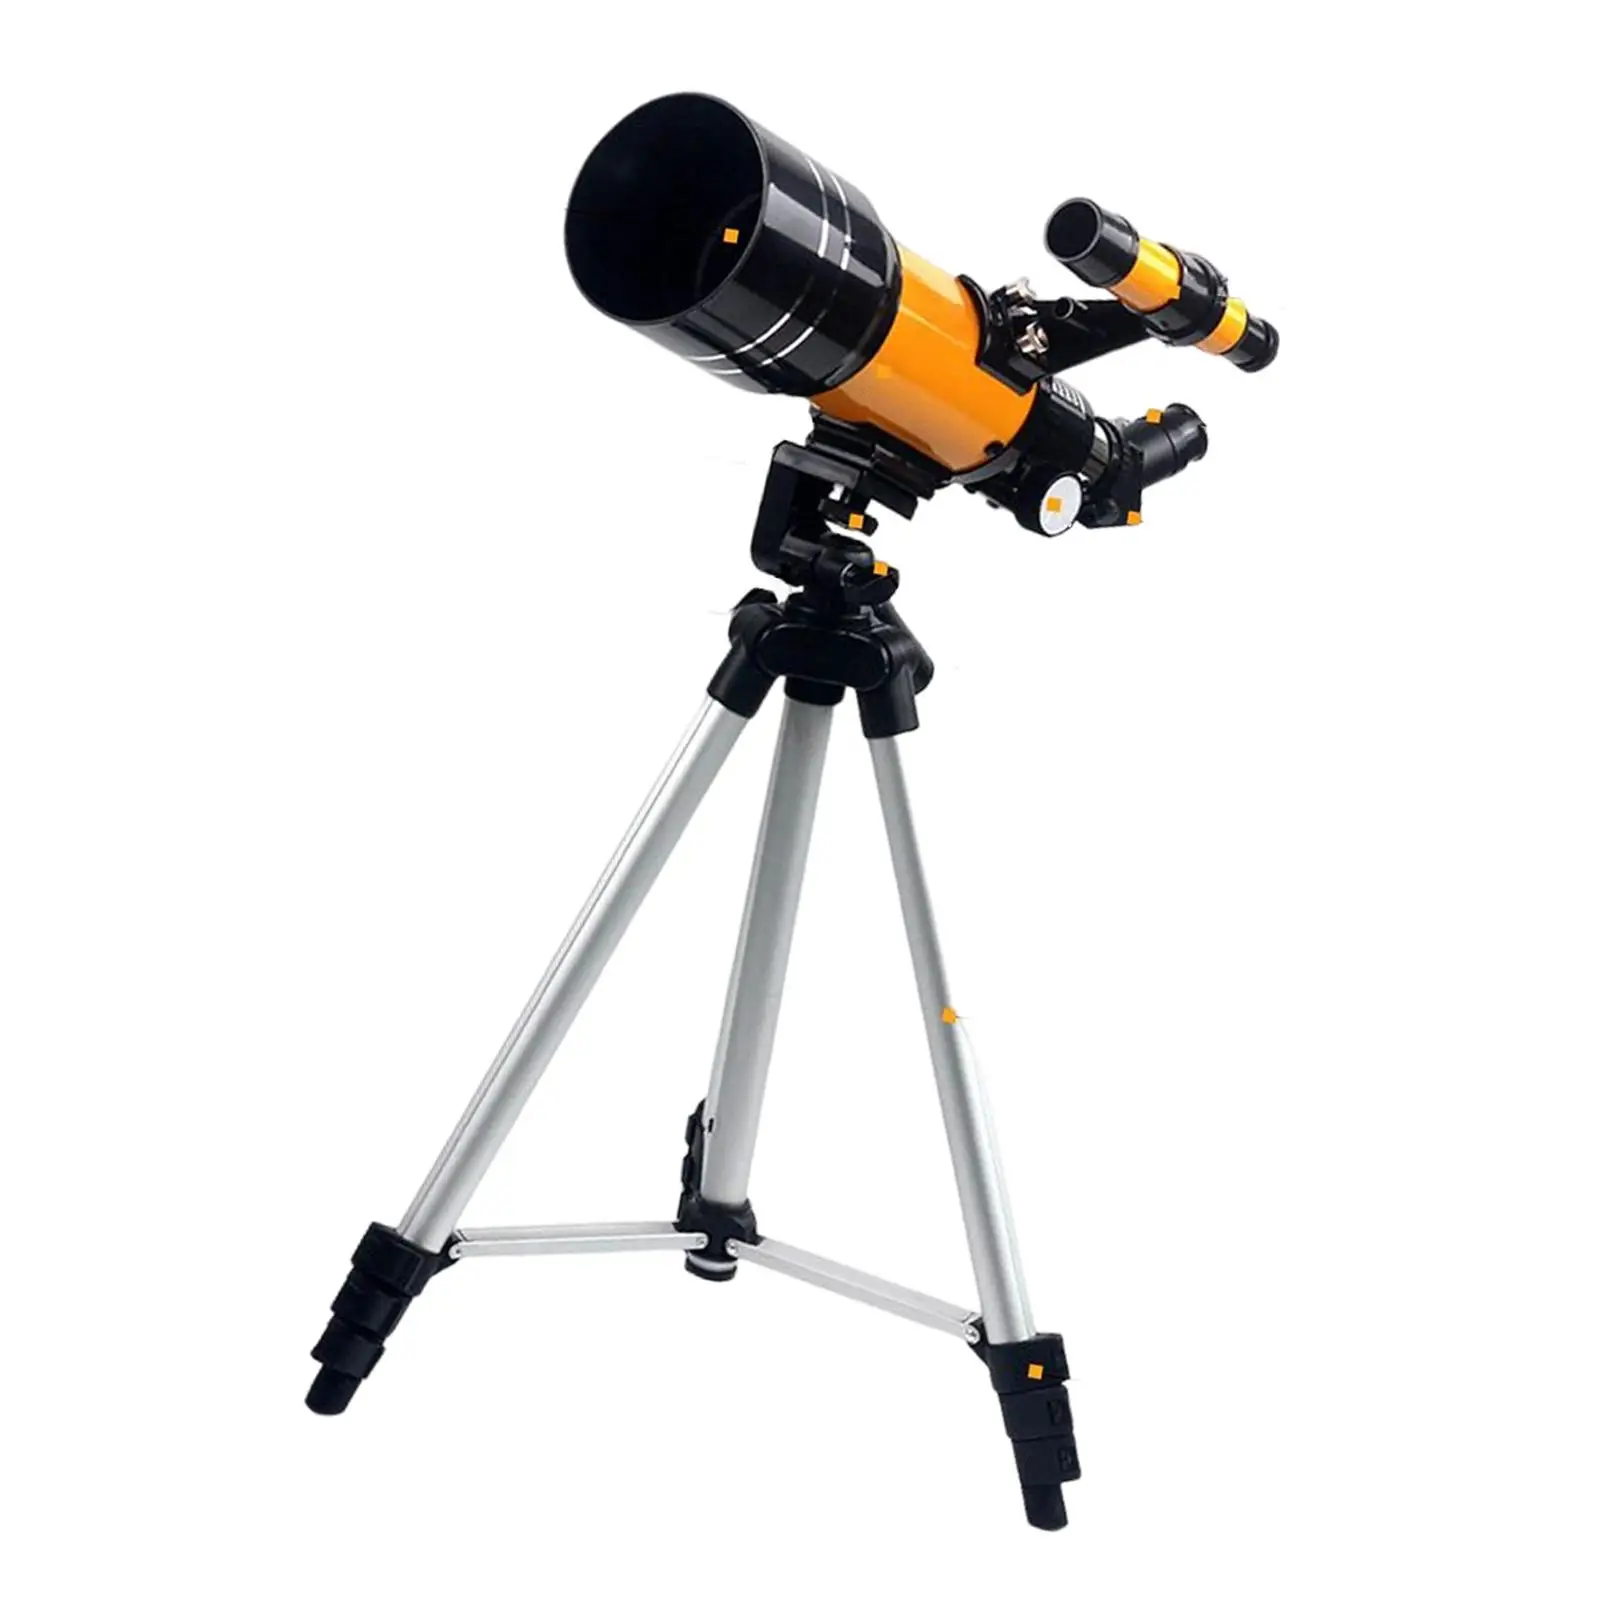 Travel Telescope 70mm apertures Fully Coated with H6mm H20mm Eyepiece Astronomical Refractor Telescopes for Kids Adults Beginner